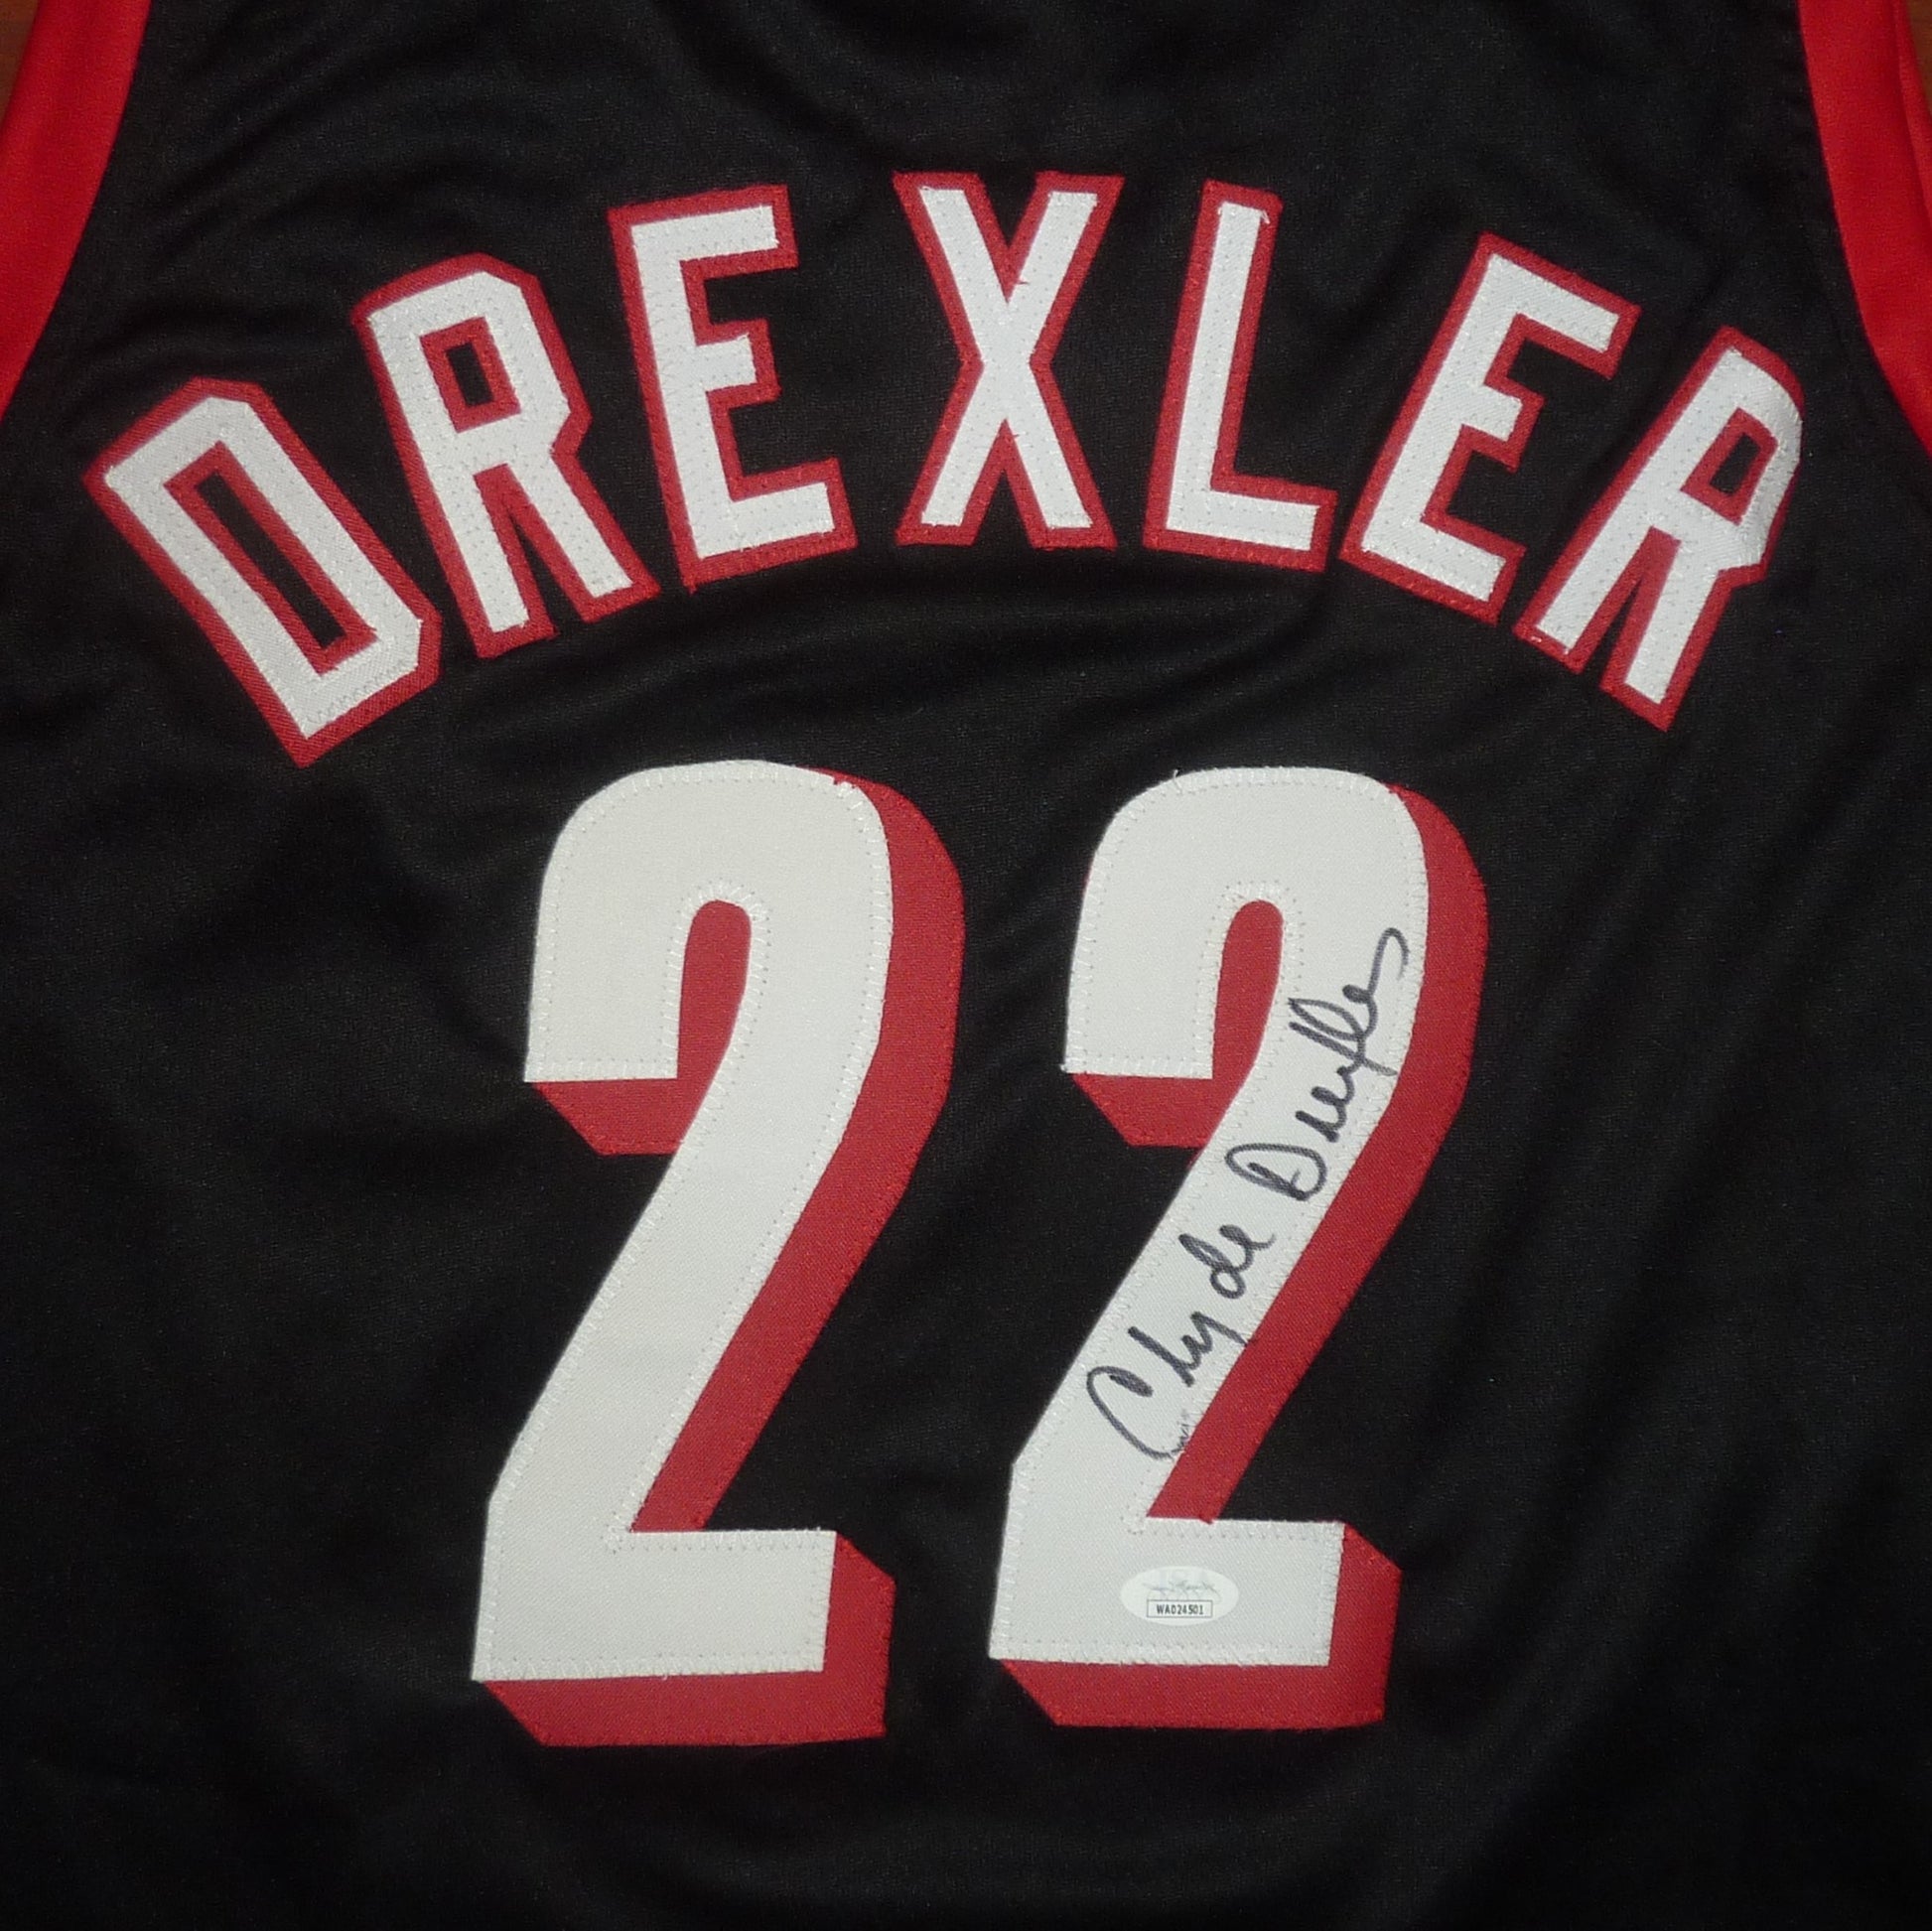 Clyde Drexler Authentic Signed Red Pro Style Framed Jersey BAS Witnessed